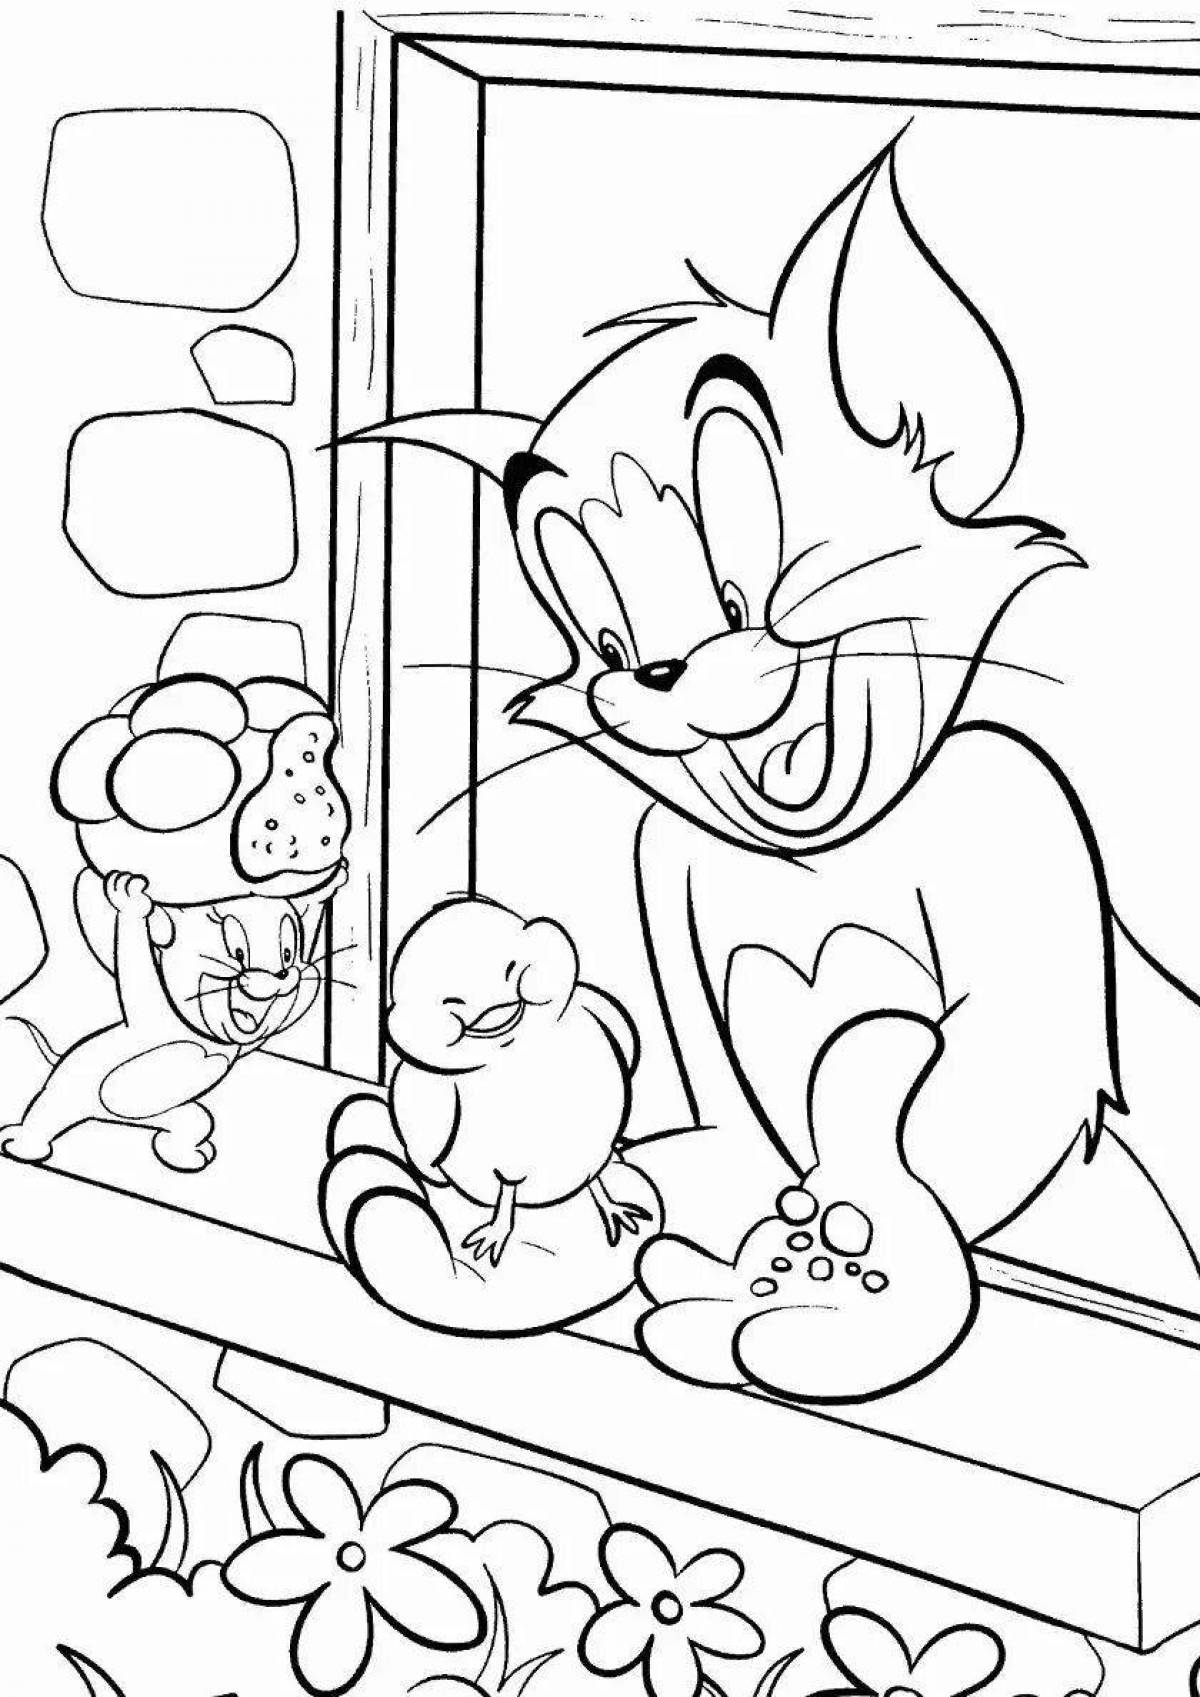 Coloring game tom and jerry